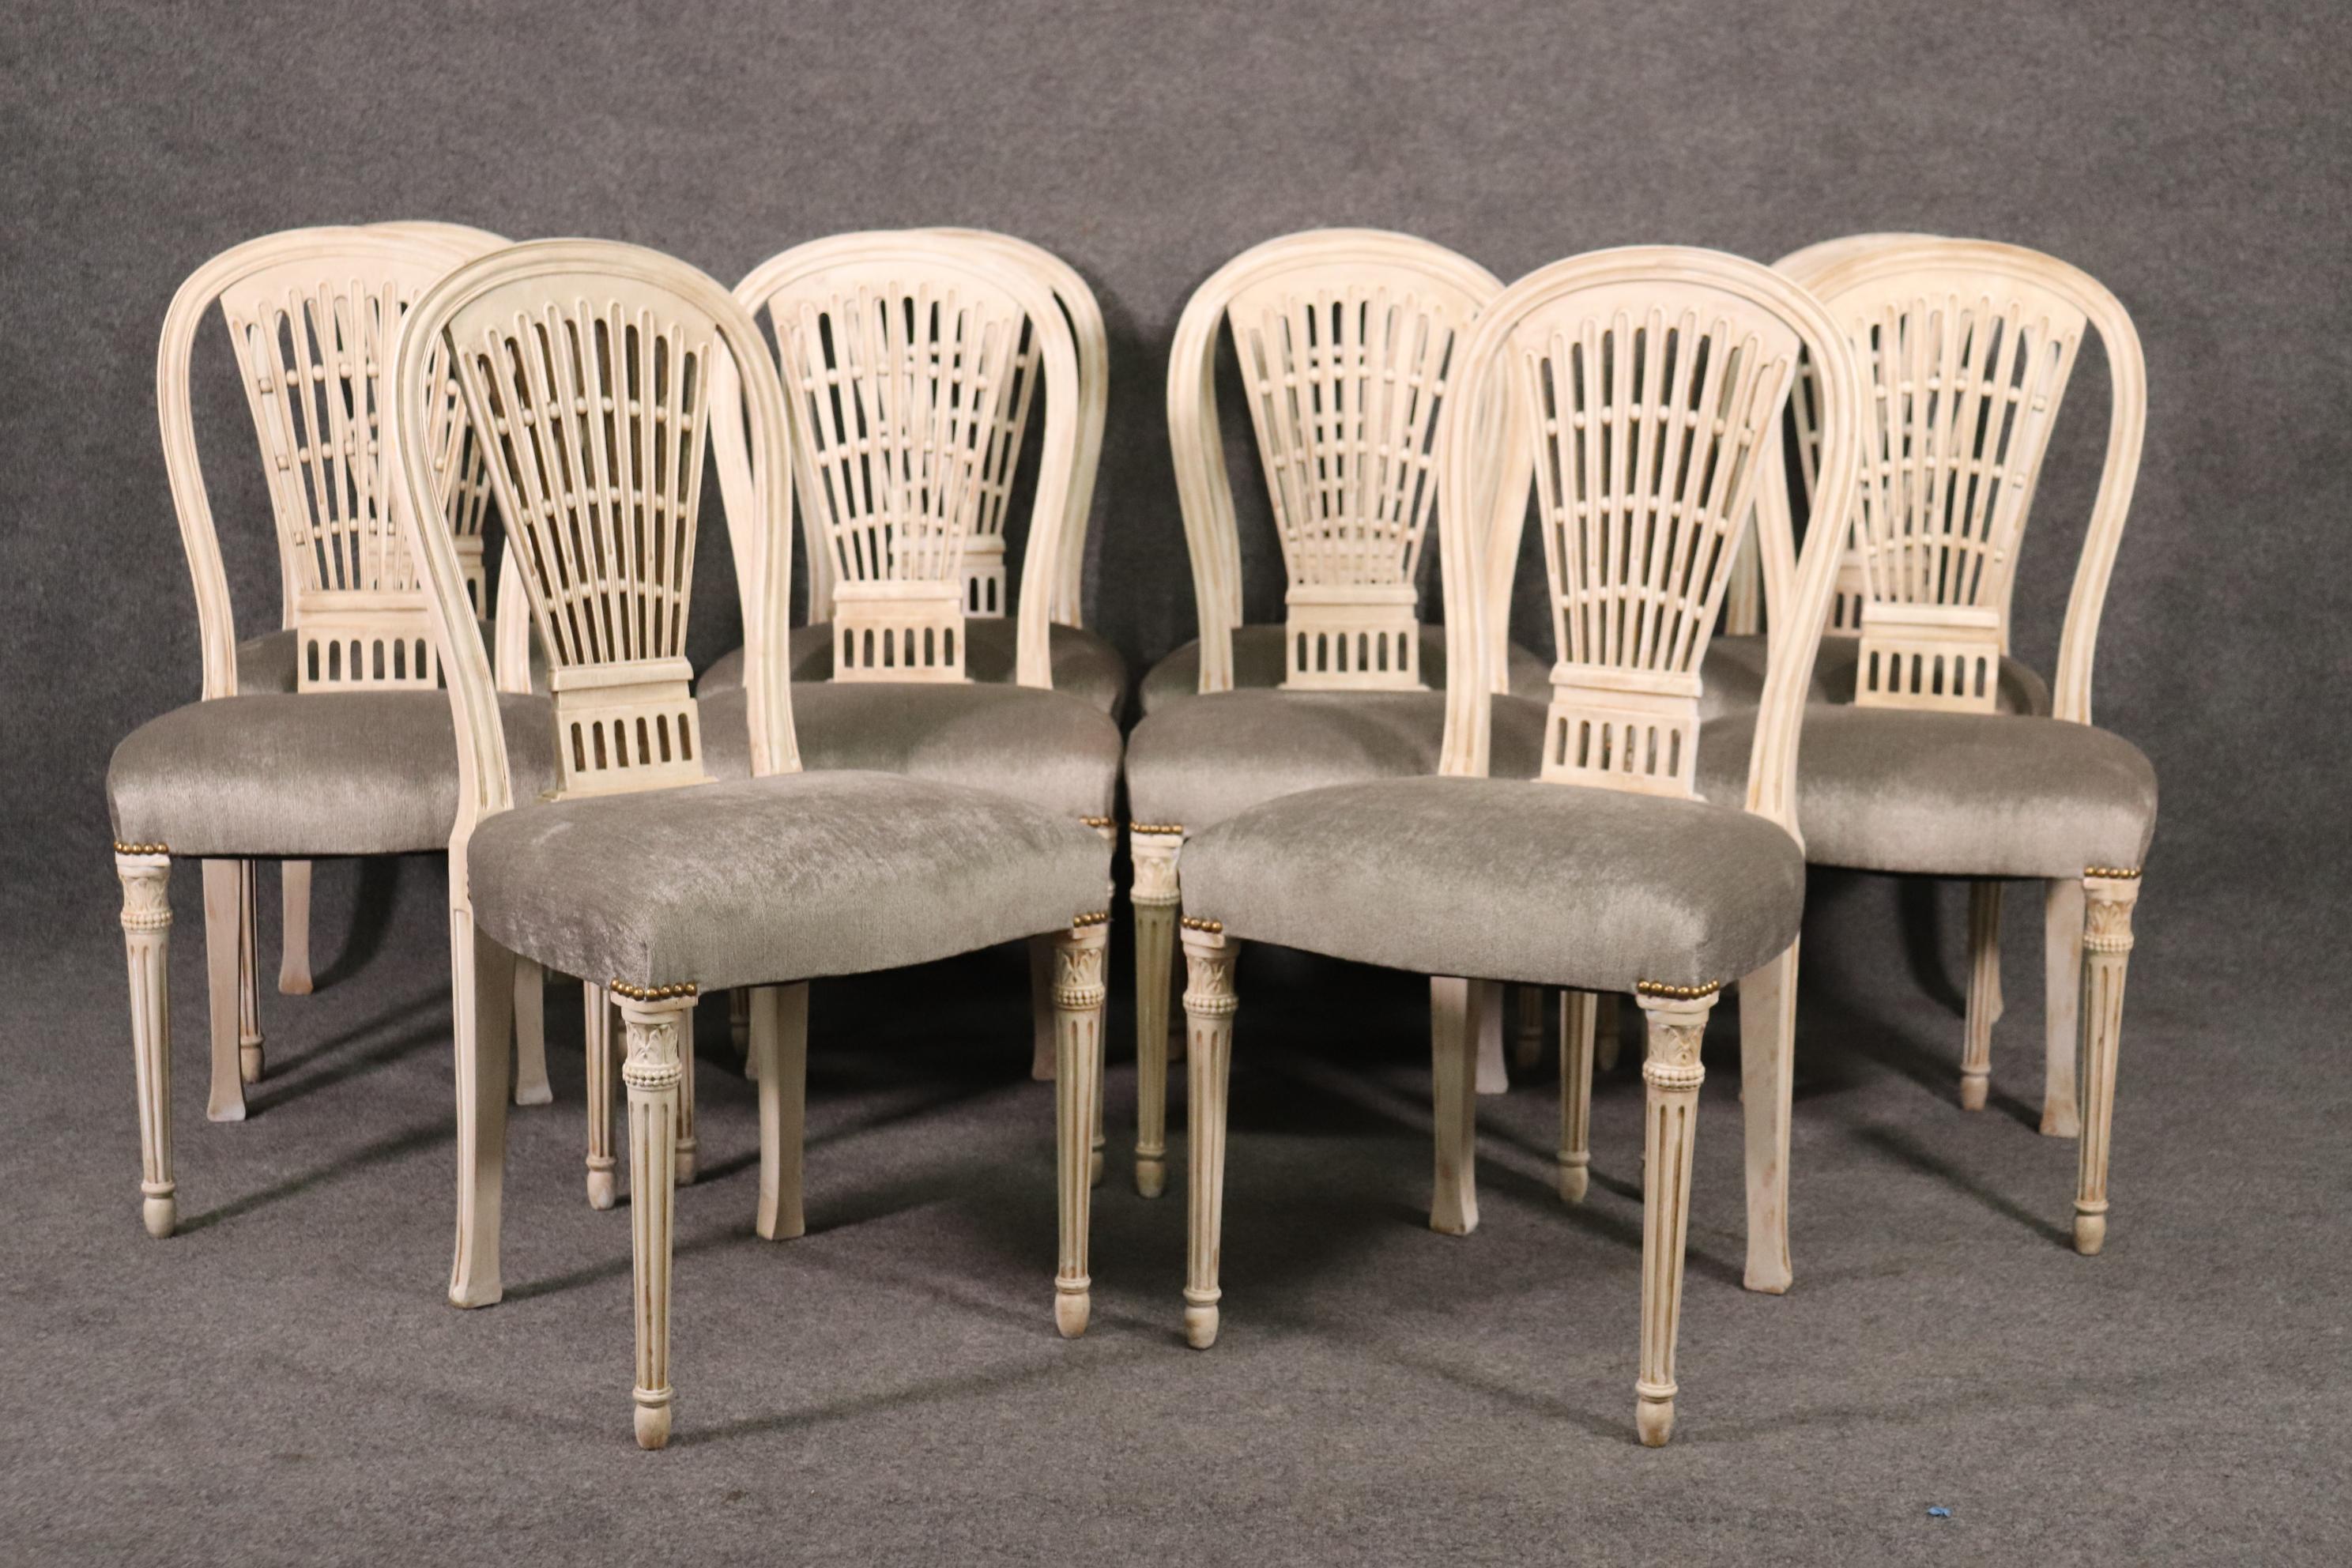 This is a newly upholstered set of 8 Maison Jansen chairs. Each chair is beautifully carved and painted in an antique distressed painted finish. The chairs are in excellent condition and have new upholstery so no stains. They each measure 37 tall x